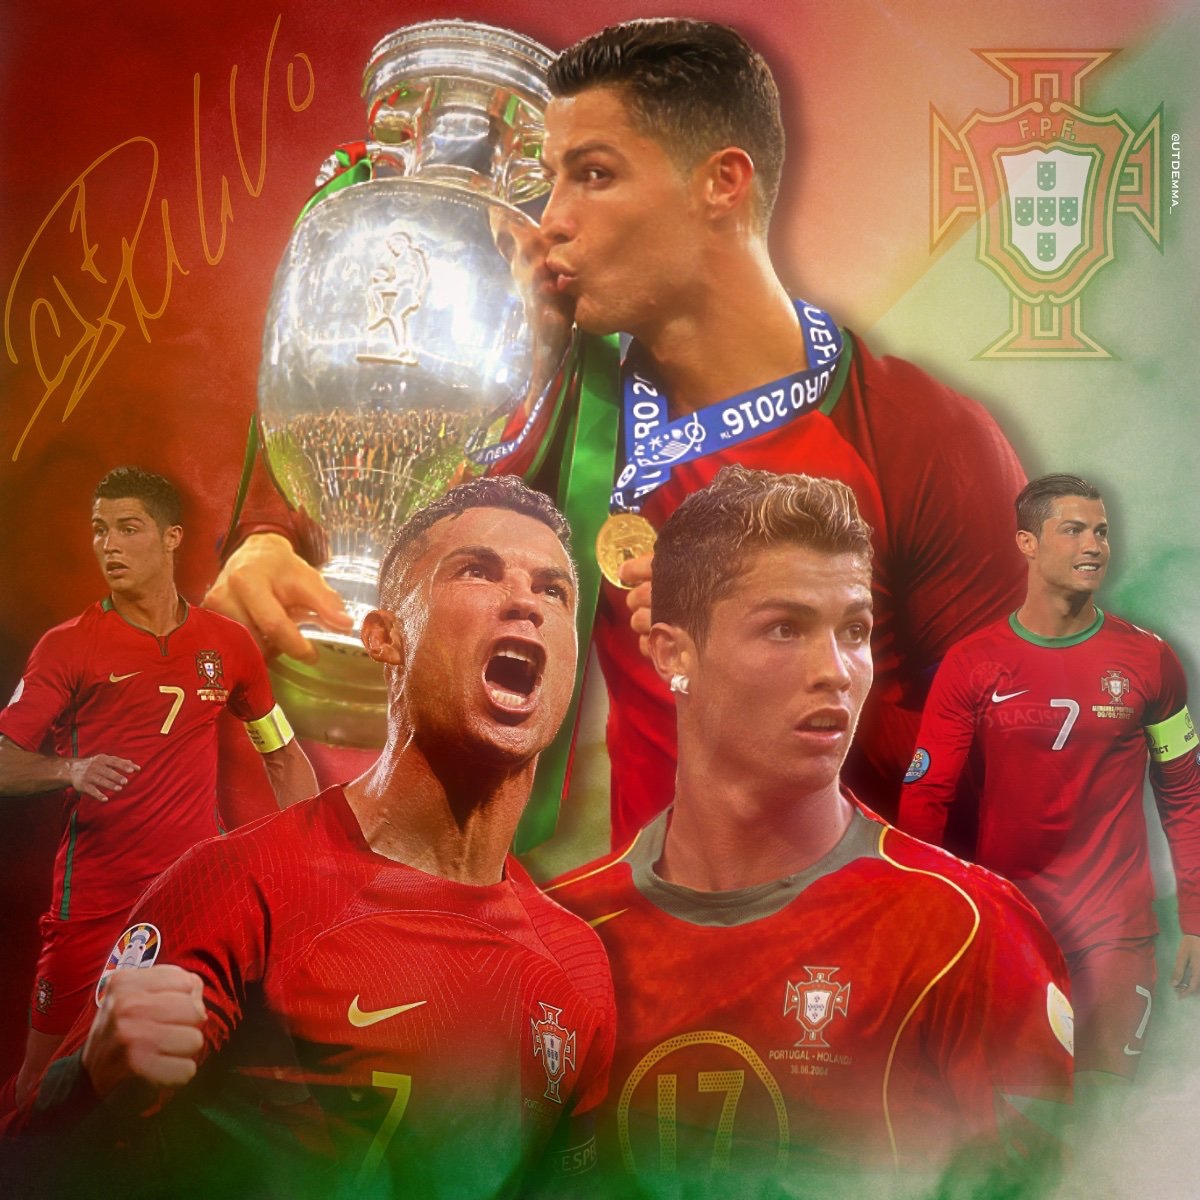 Rivaldo: “Portugal always does good in Euros because the best player in the world is Portuguese.”